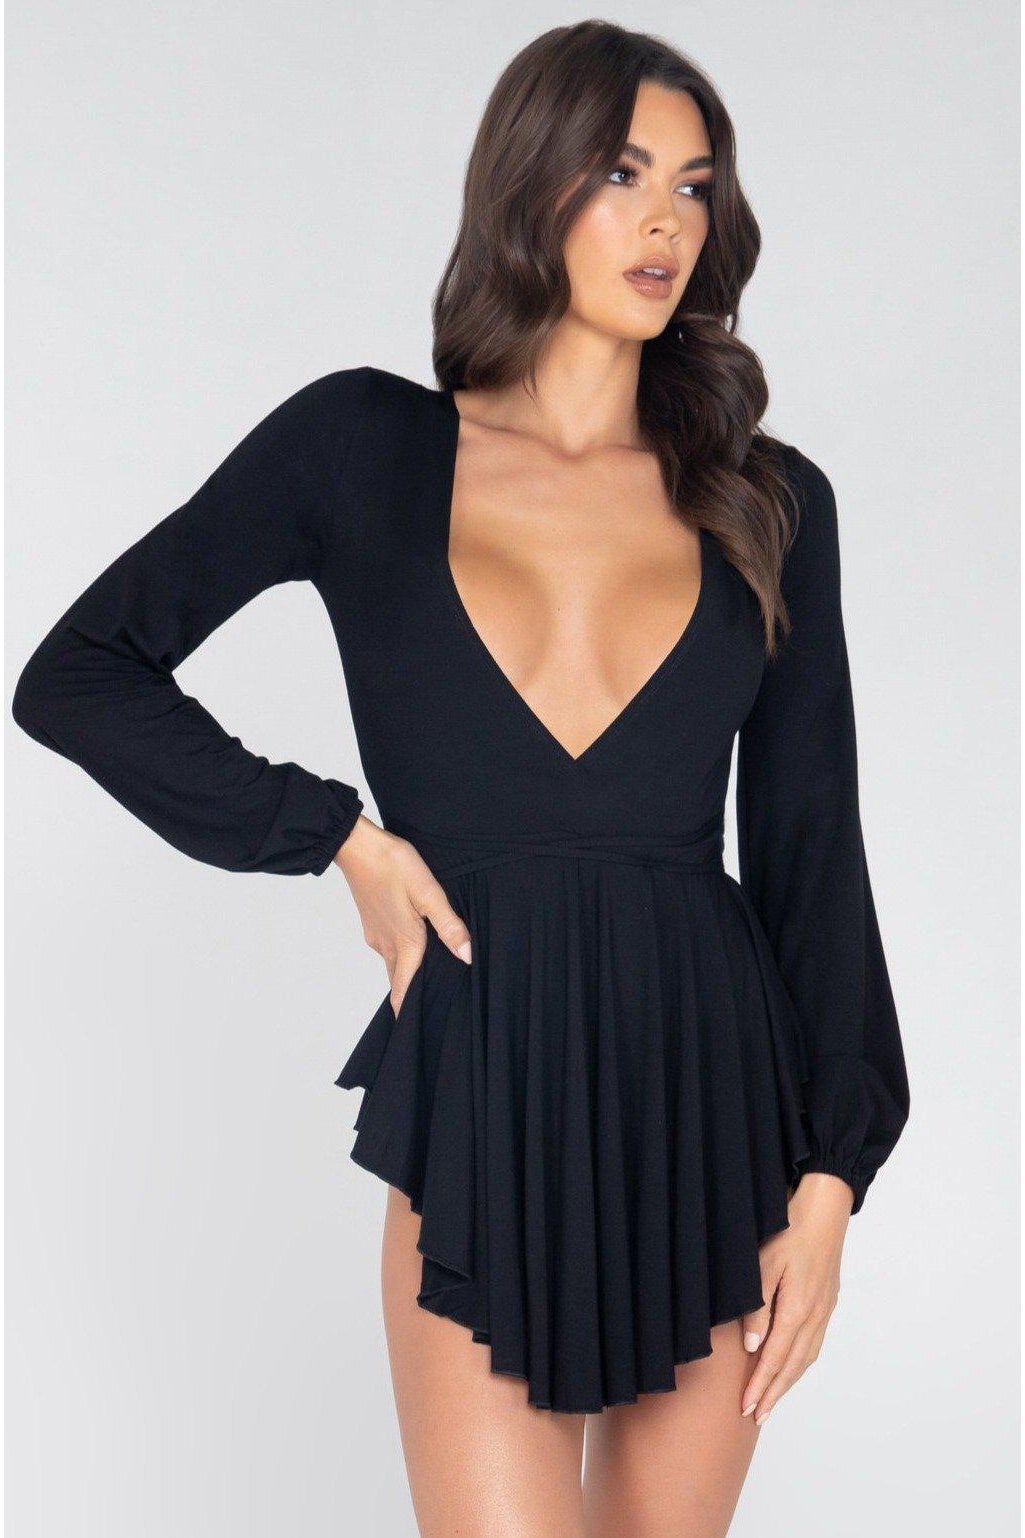 Long Sleeve Skater Dress with Criss-Cross Strap-Club Dresses-Roma Confidential-Black-L-SEXYSHOES.COM